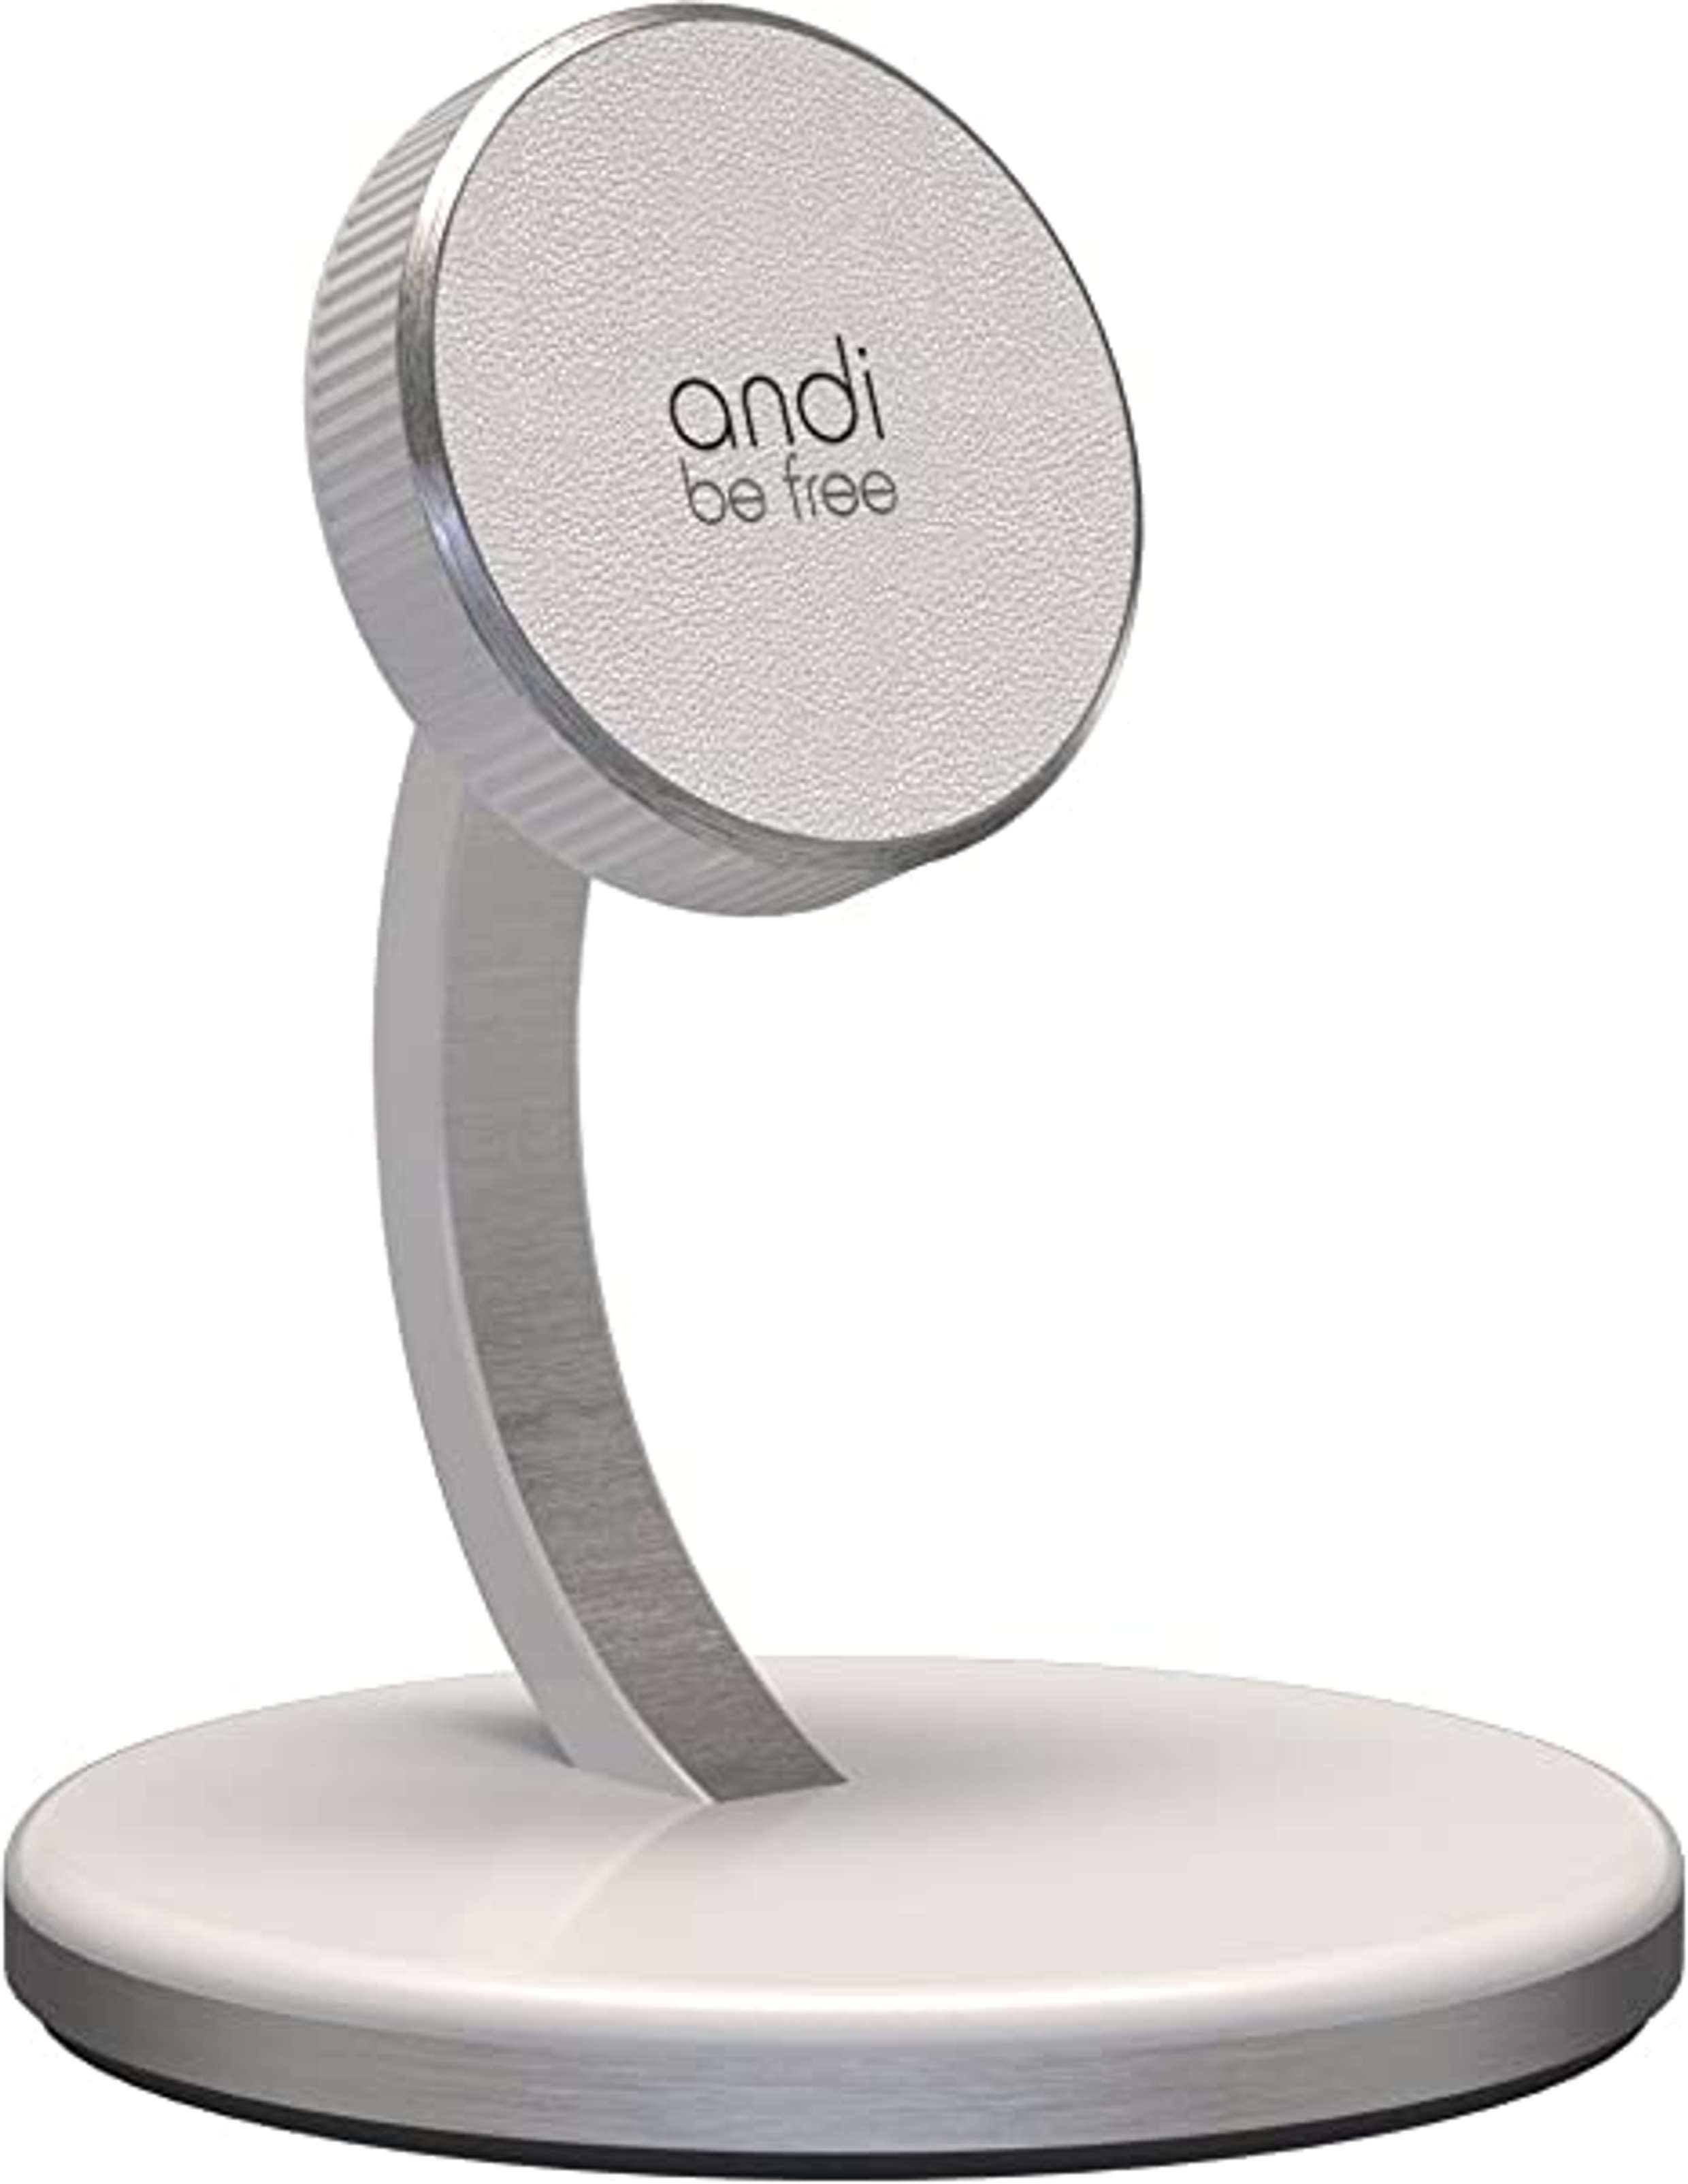 andi be free Wireless Charger Induktions-Ladegerät (Turbo Charger, 12V Anschluss)